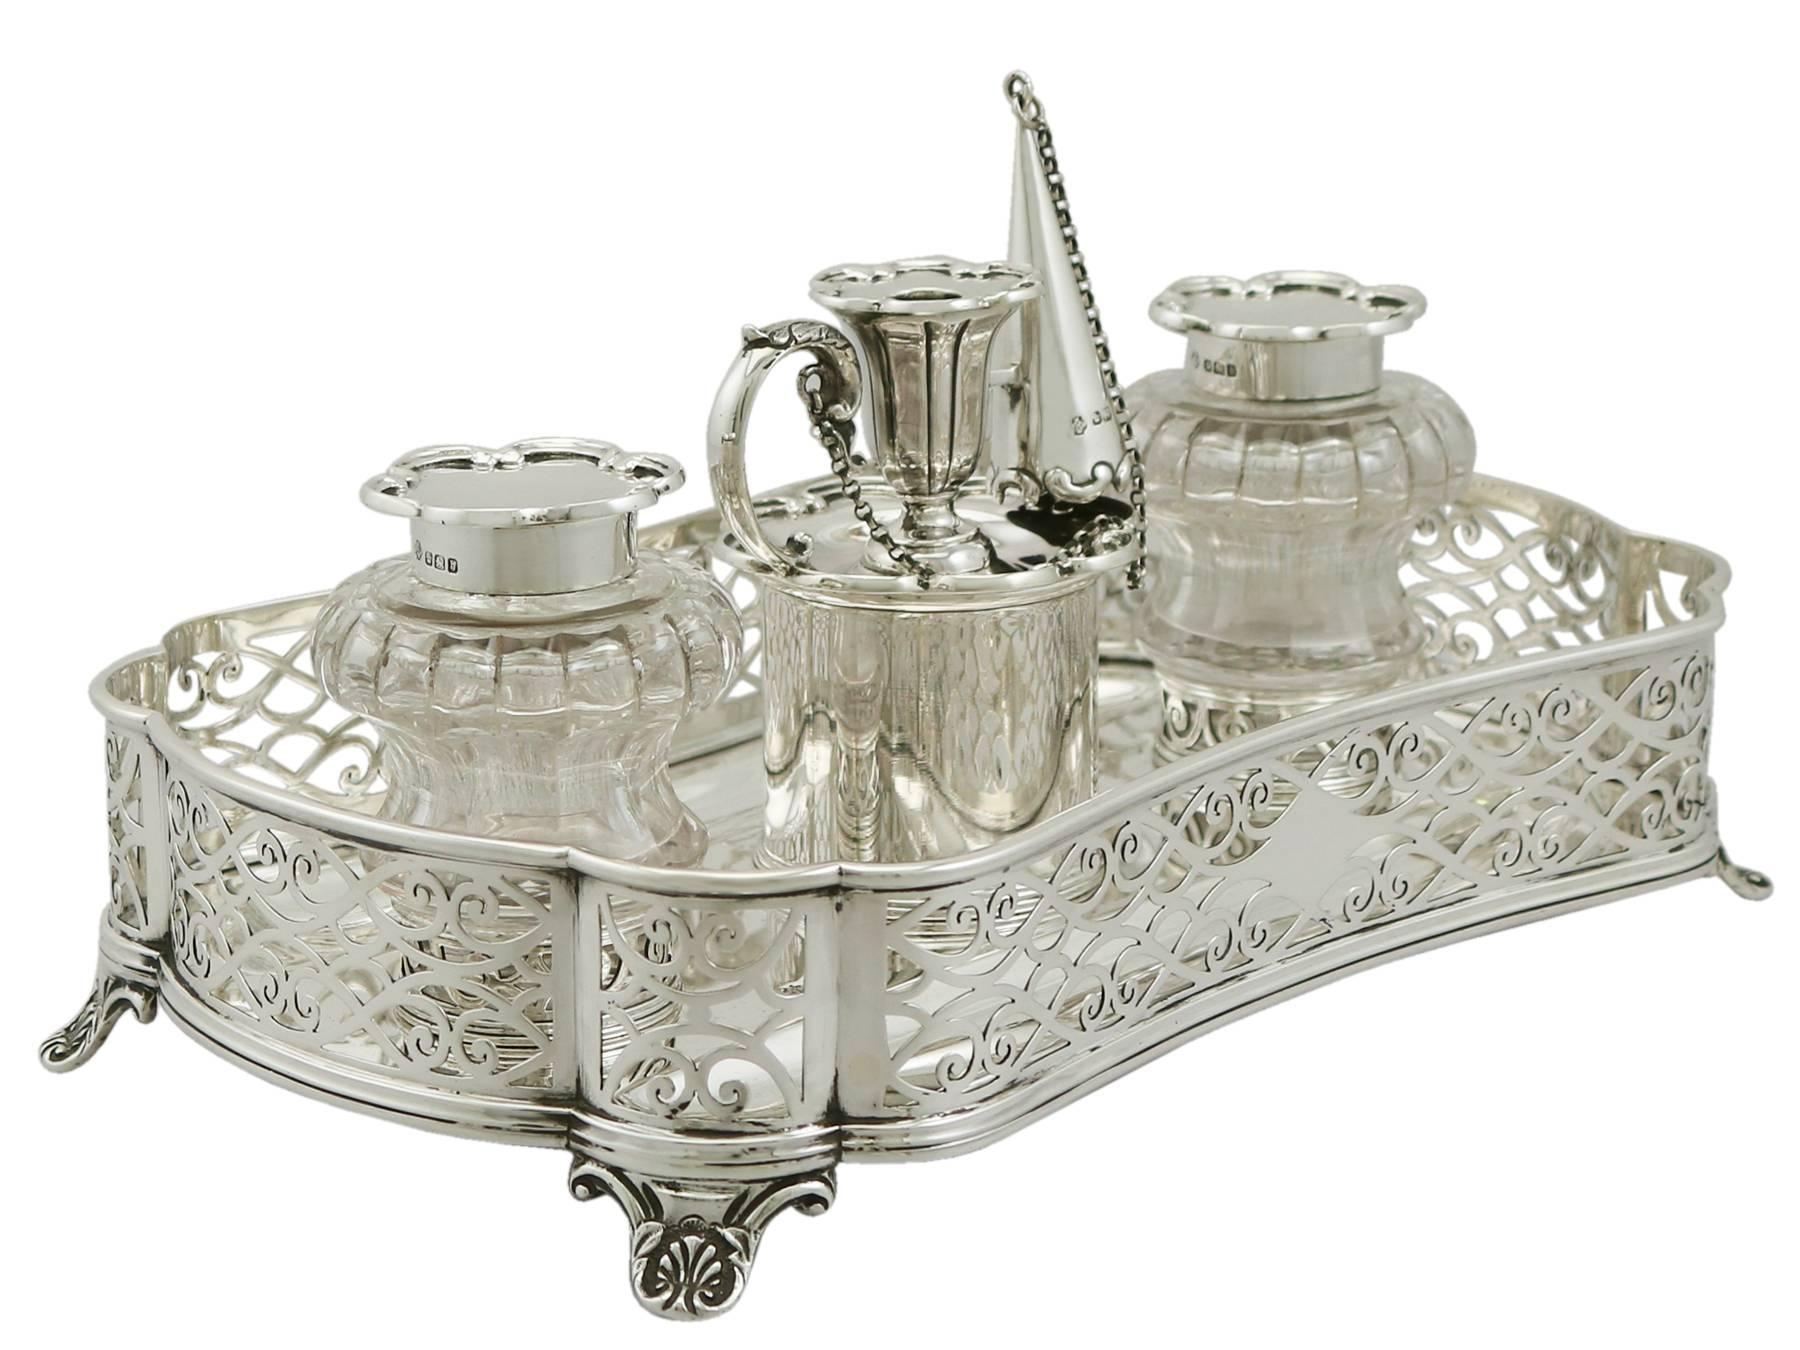 An exceptional, fine and impressive antique Victorian English sterling silver desk standish by William Hutton & Sons; an addition to our ornamental silverware collection

This exceptional antique Victorian sterling silver desk standish has a